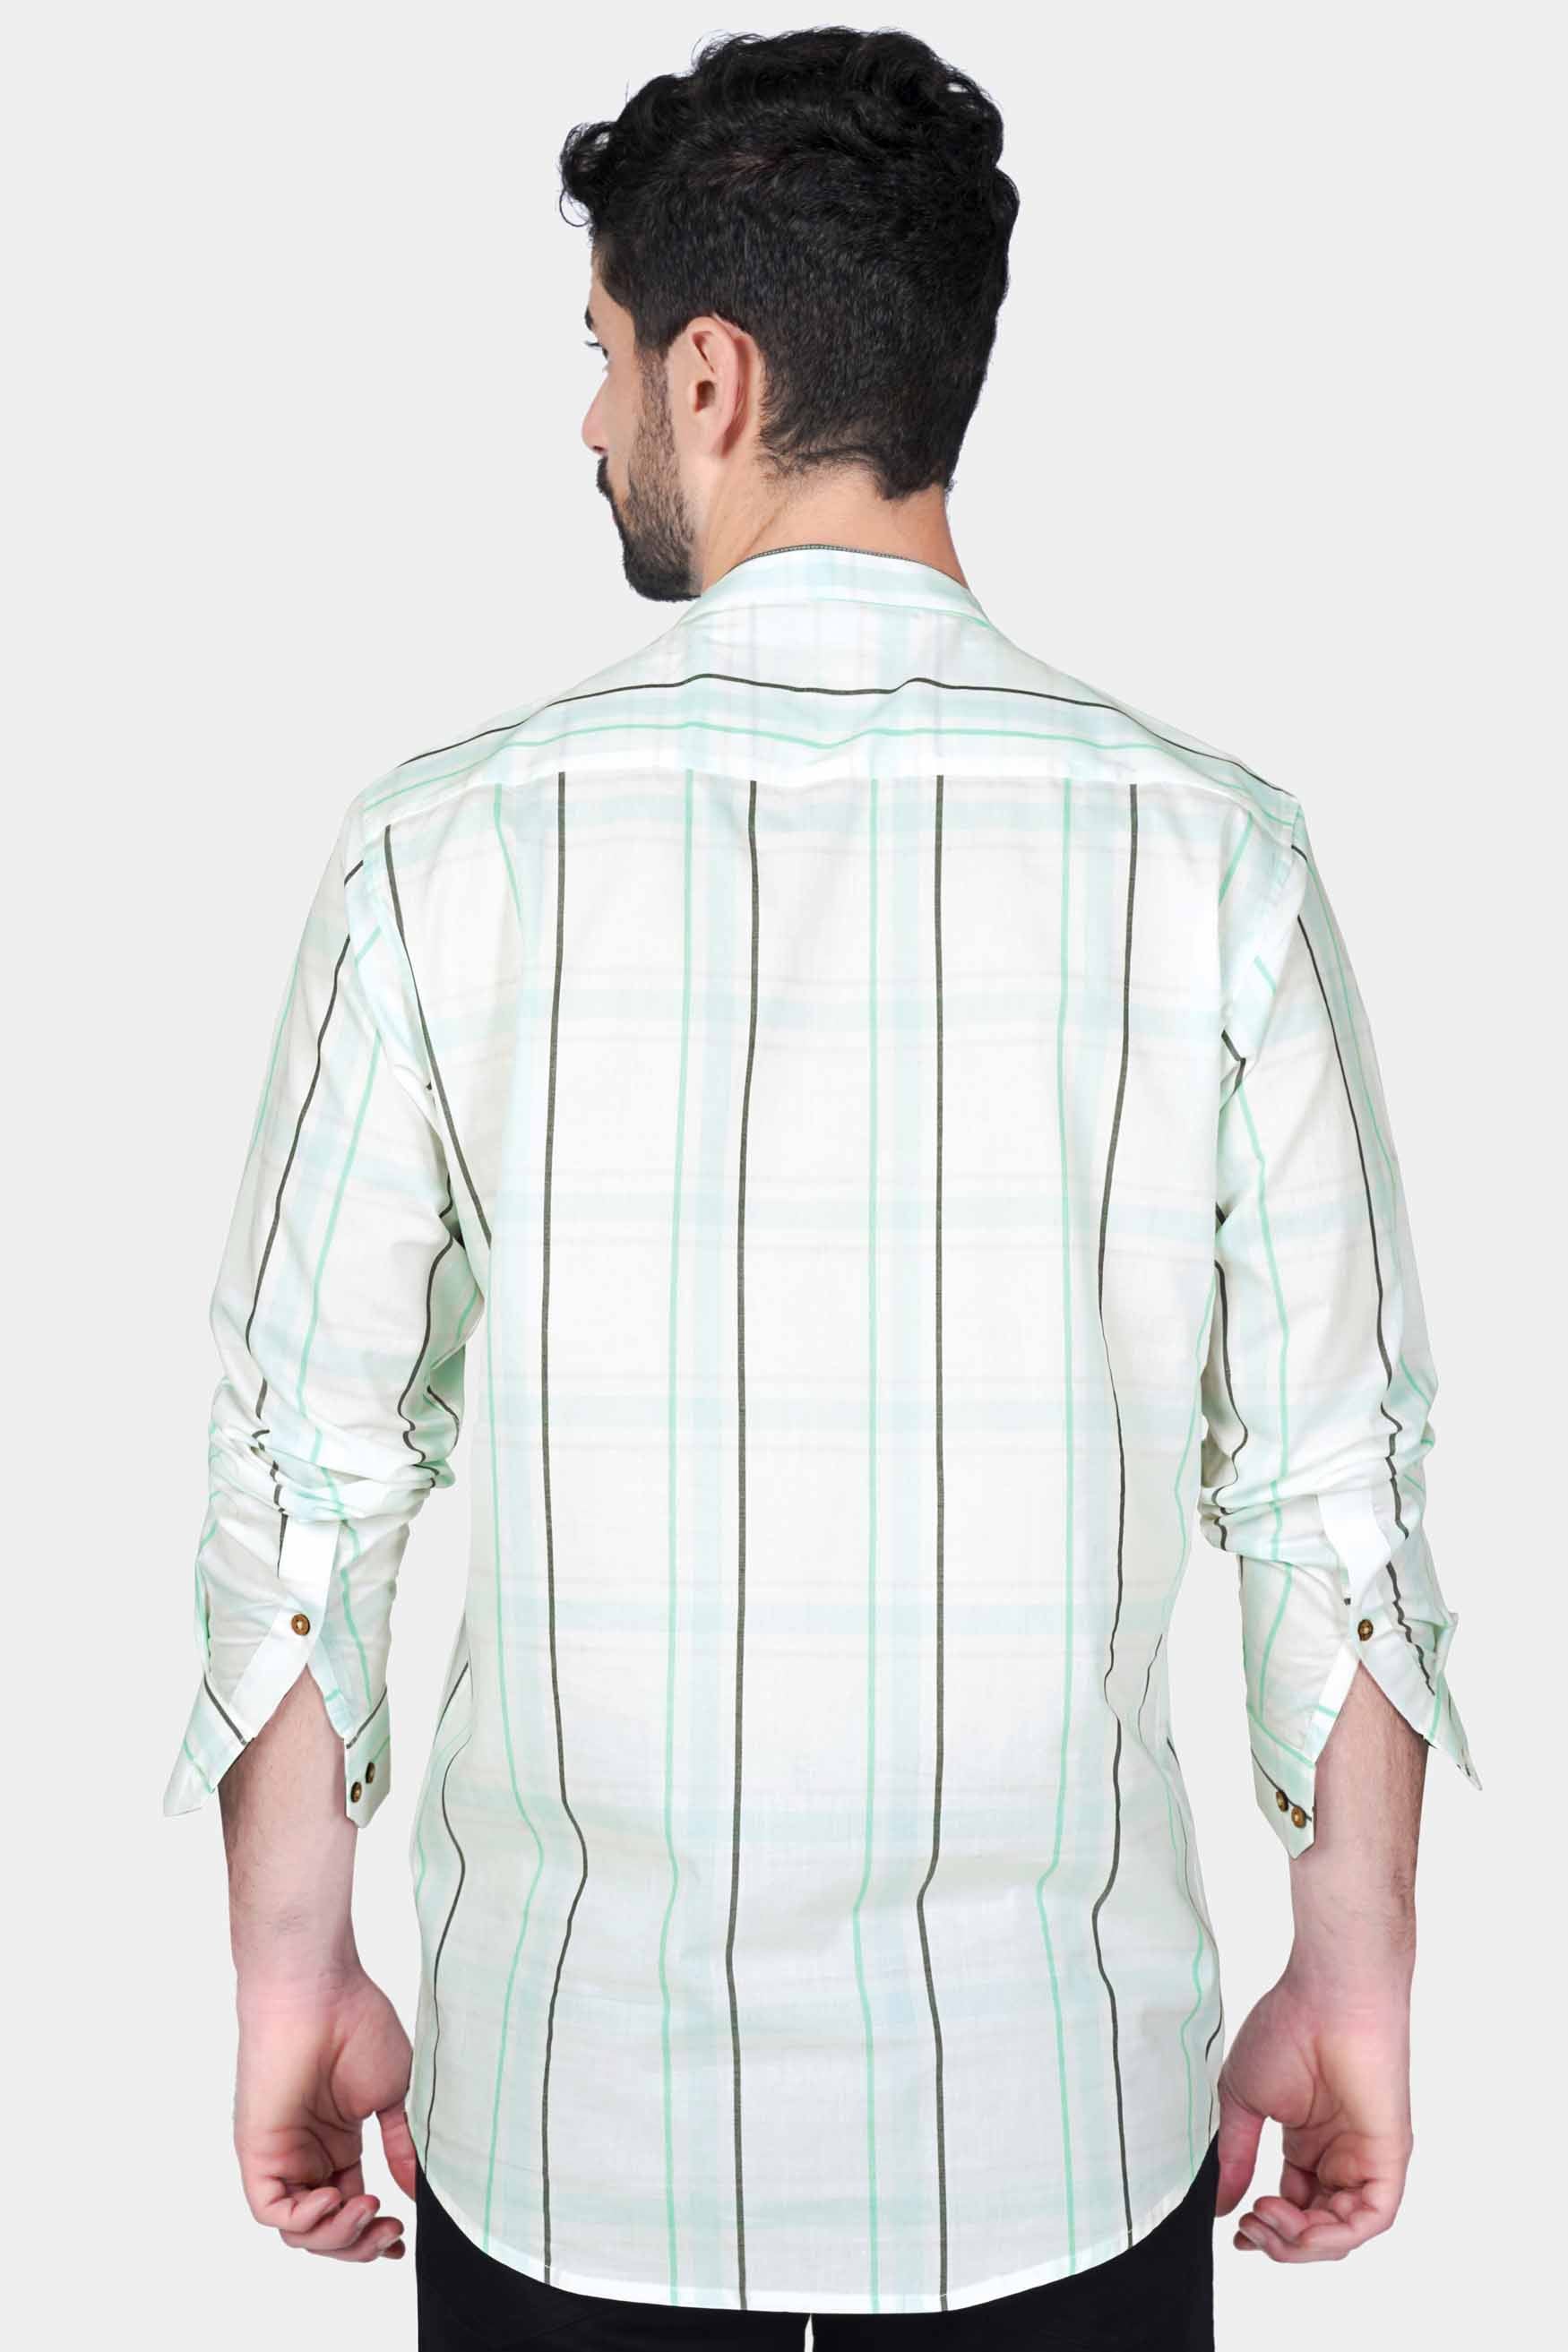 Bright White with Cruise Green and Iridium Gray Striped with Alien Patchwork Premium Cotton Designer Kurta Shirt 8181-KS-E336-38, 8181-KS-E336-H-38, 8181-KS-E336-39, 8181-KS-E336-H-39, 8181-KS-E336-40, 8181-KS-E336-H-40, 8181-KS-E336-42, 8181-KS-E336-H-42, 8181-KS-E336-44, 8181-KS-E336-H-44, 8181-KS-E336-46, 8181-KS-E336-H-46, 8181-KS-E336-48, 8181-KS-E336-H-48, 8181-KS-E336-50, 8181-KS-E336-H-50, 8181-KS-E336-52, 8181-KS-E336-H-52